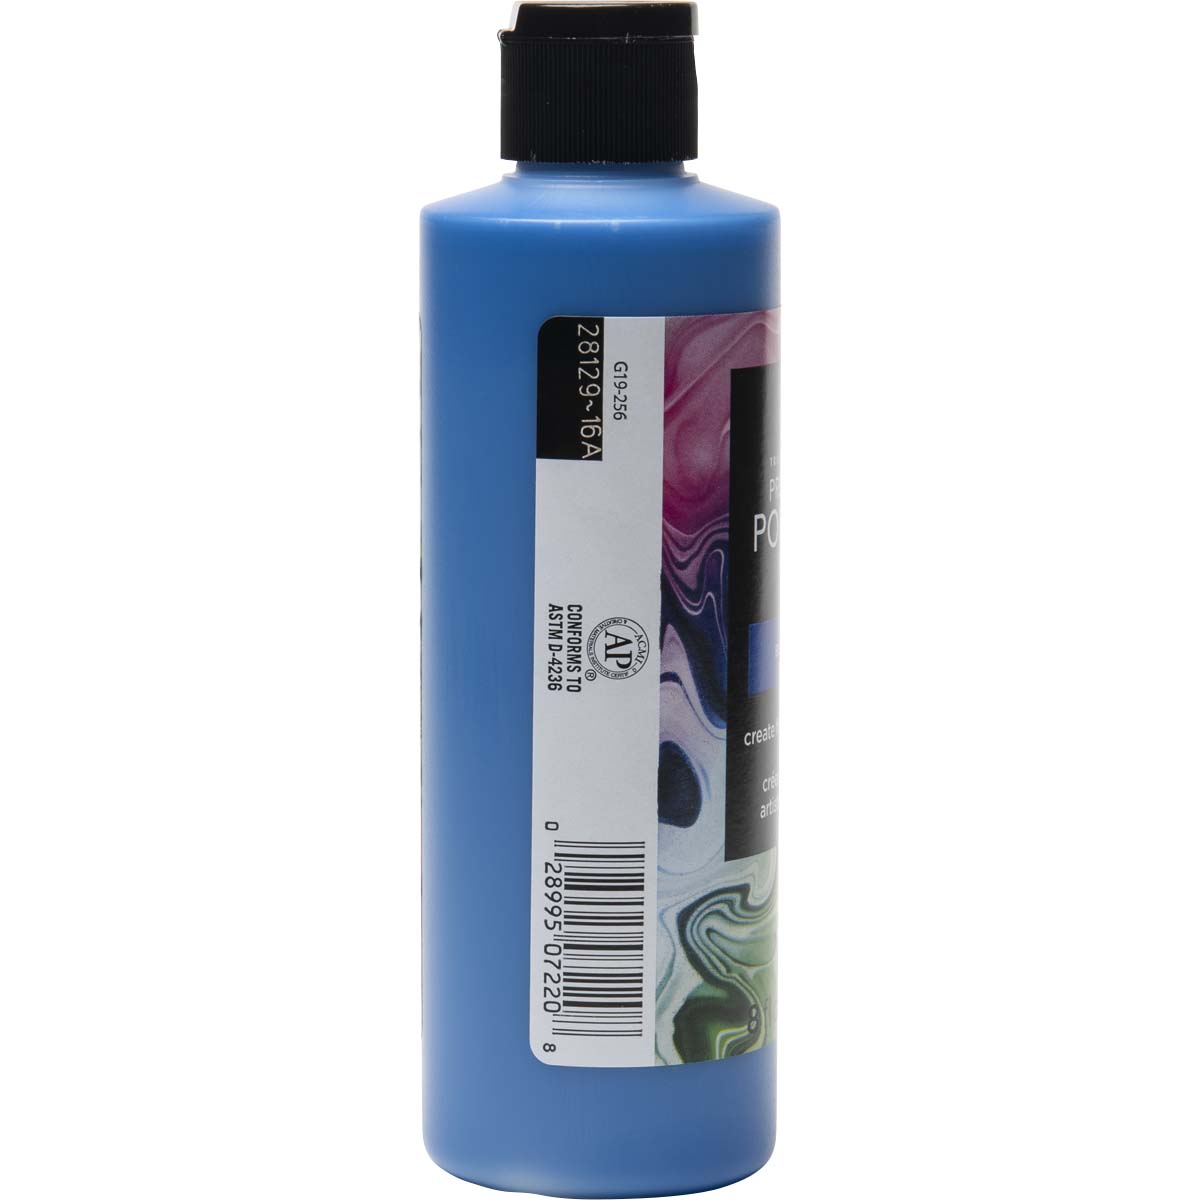 FolkArt ® Pre-mixed Pouring Paint - Bright Blue, 8 oz. - 7220